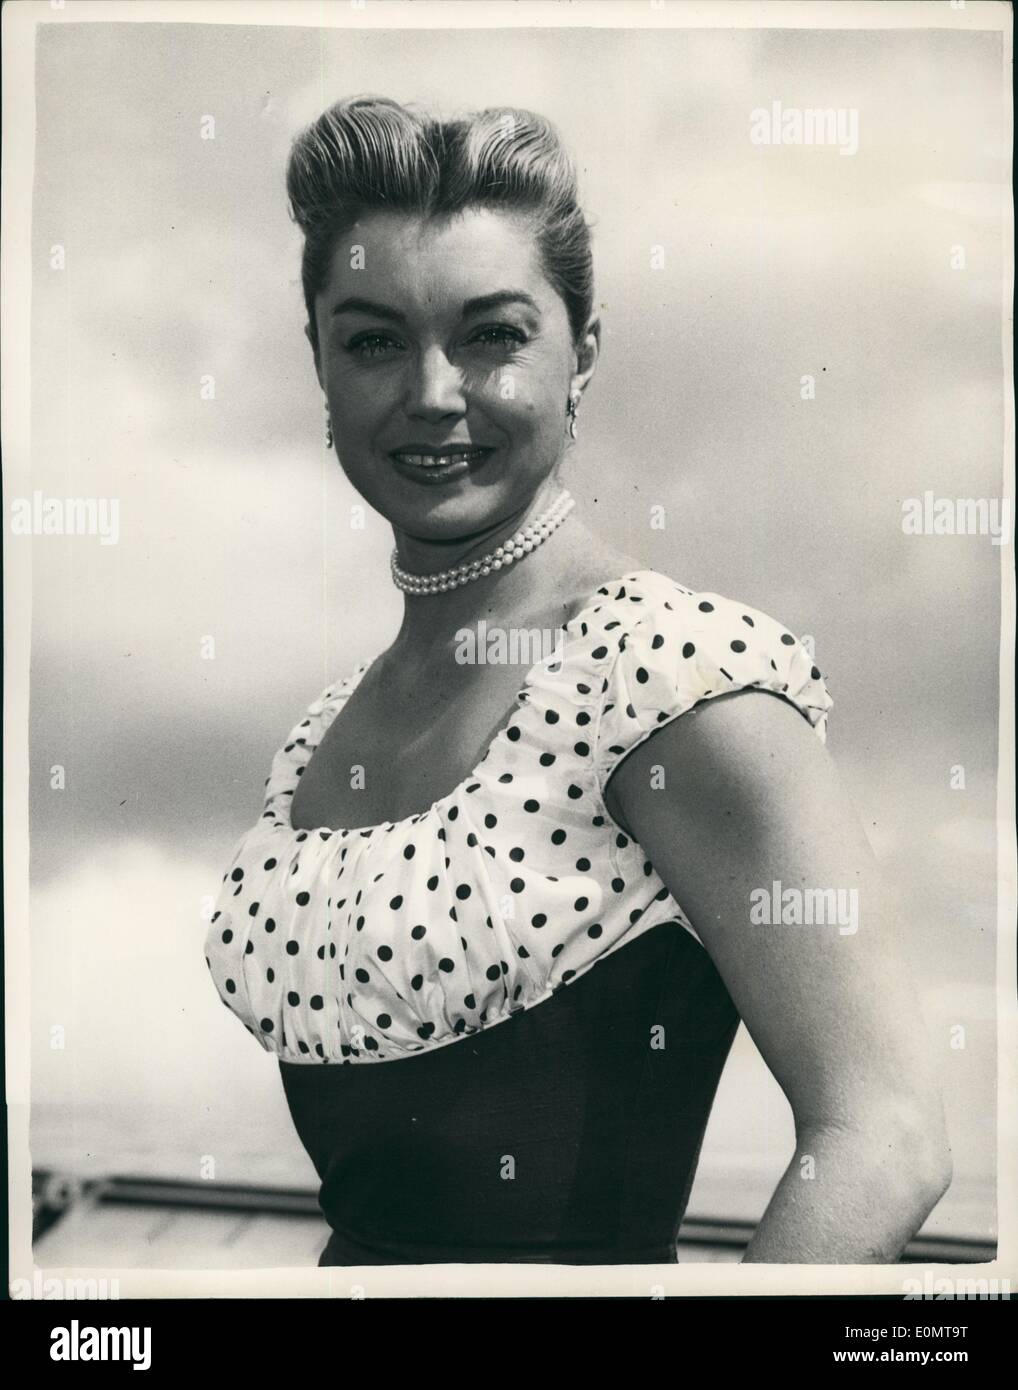 June 6, 2013 - Los Angeles, California, U.S. - Esther Williams, a championship swimmer who appeared in aquatic musicals and who Stock Photo